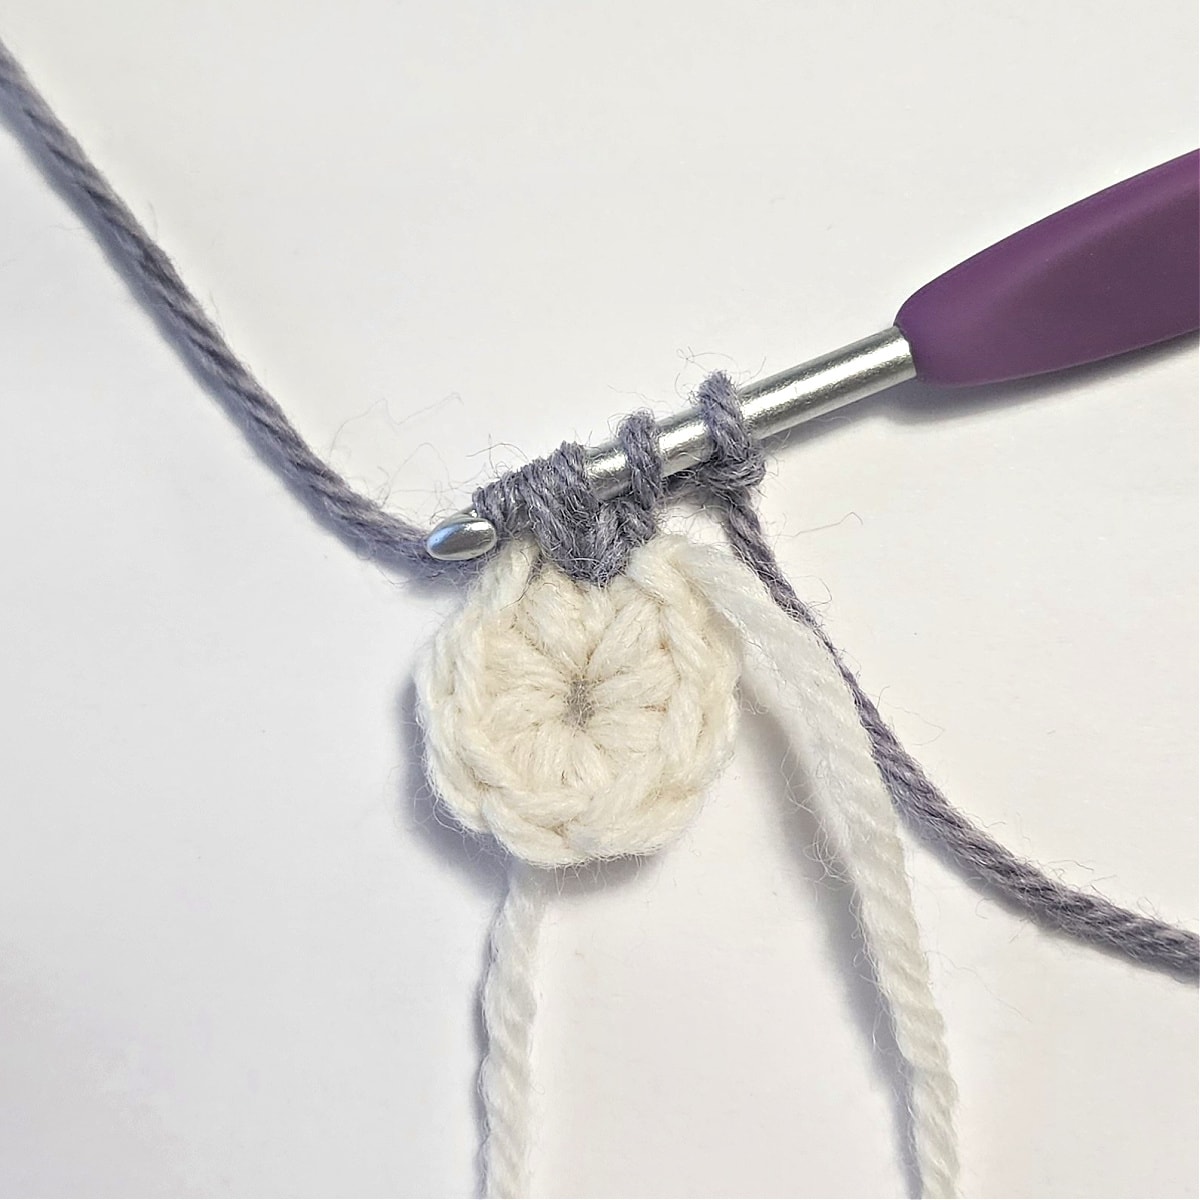 Small white crochet circle with a partial double crochet cluster.